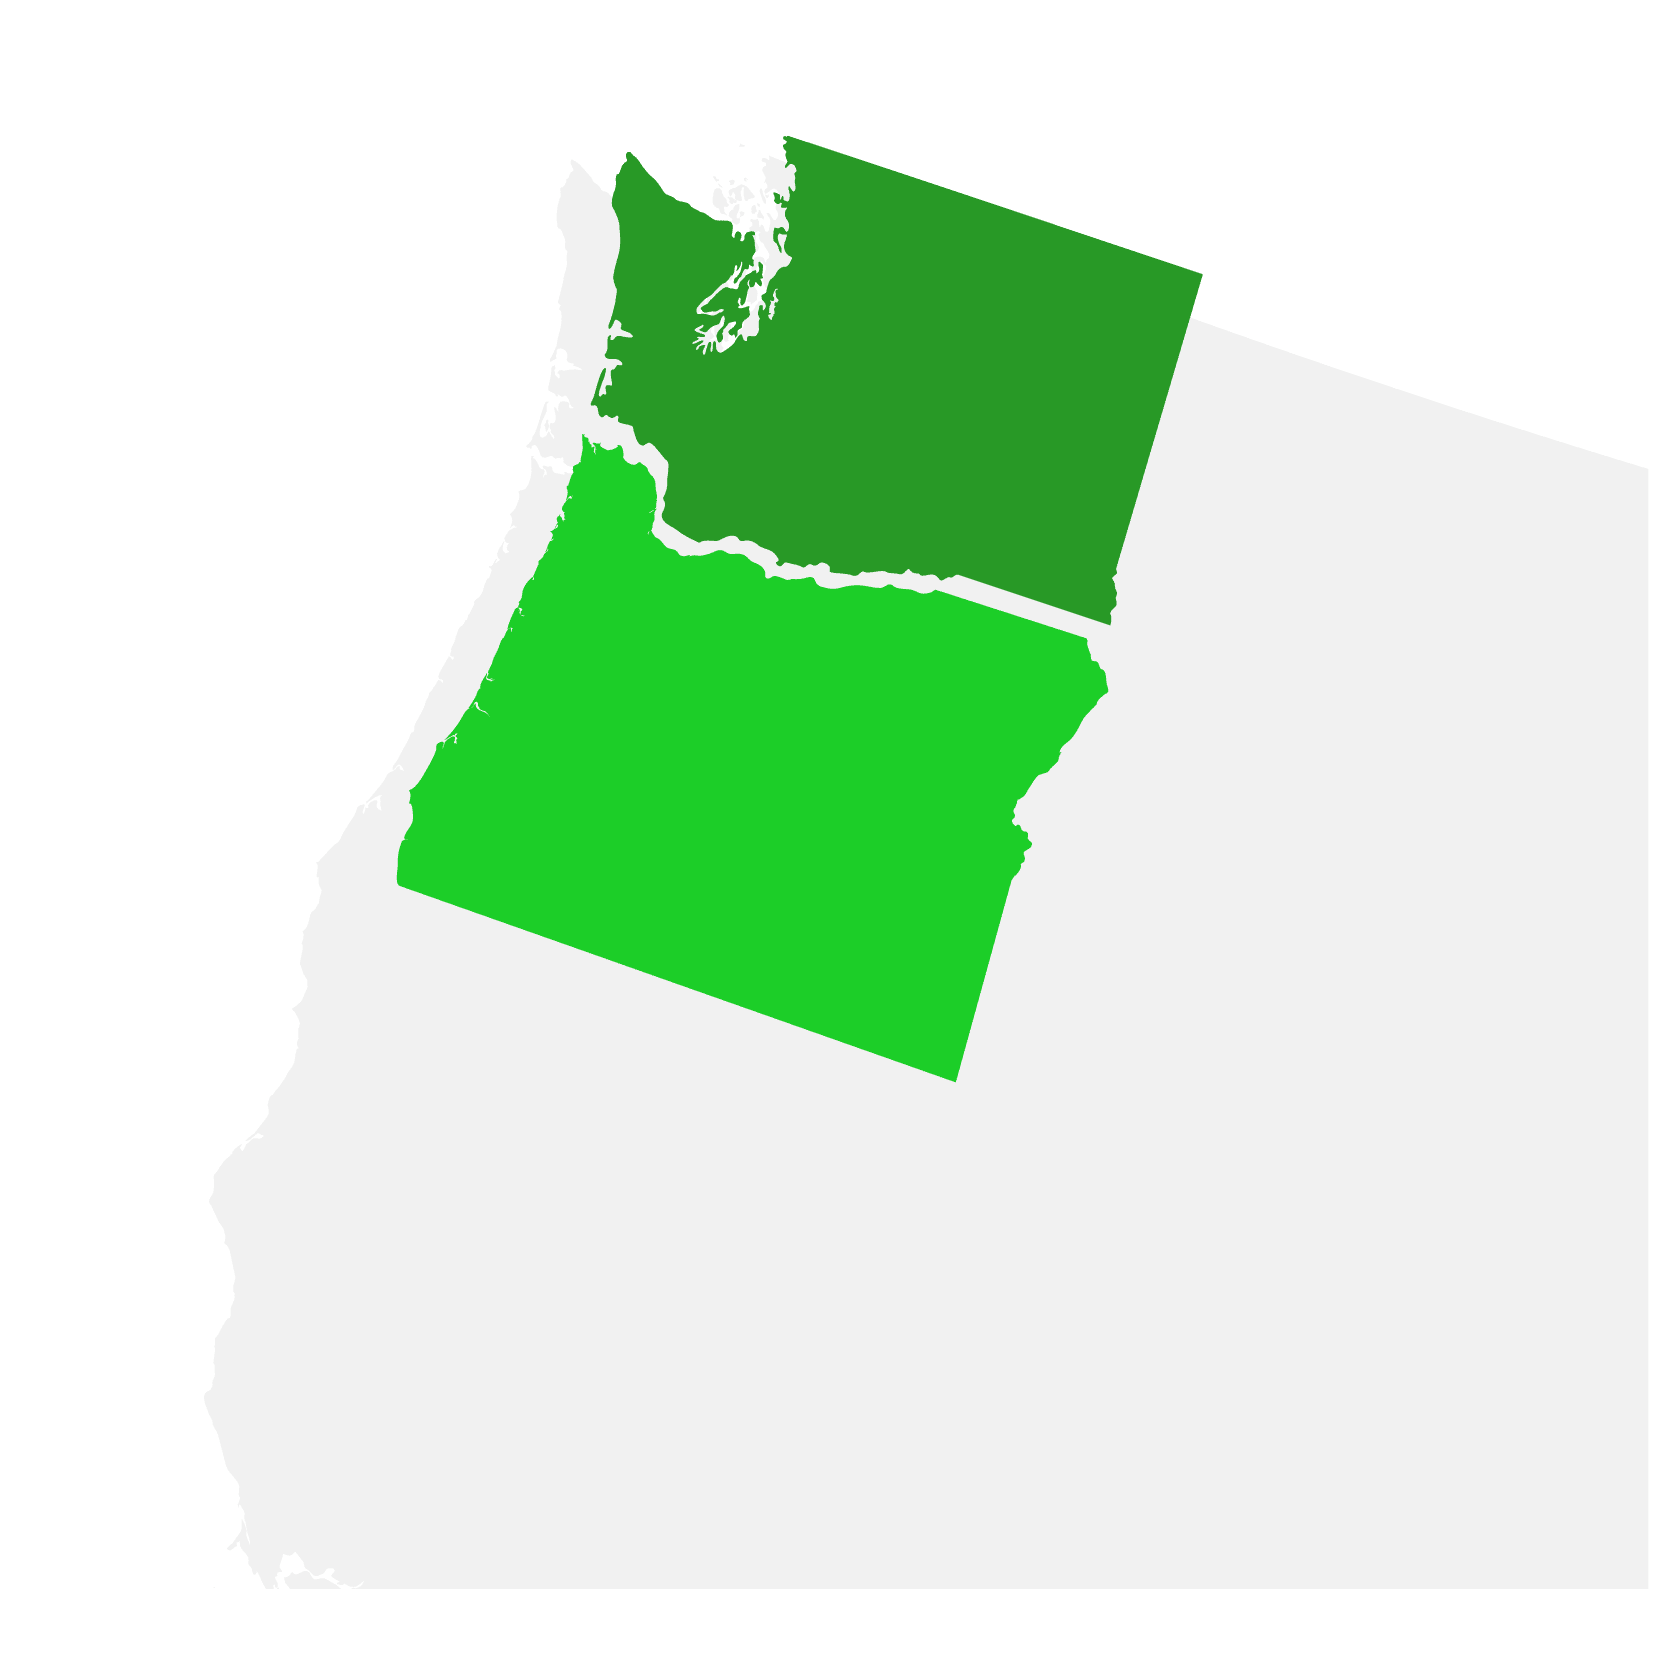 A green image of Washington state and Oregon state